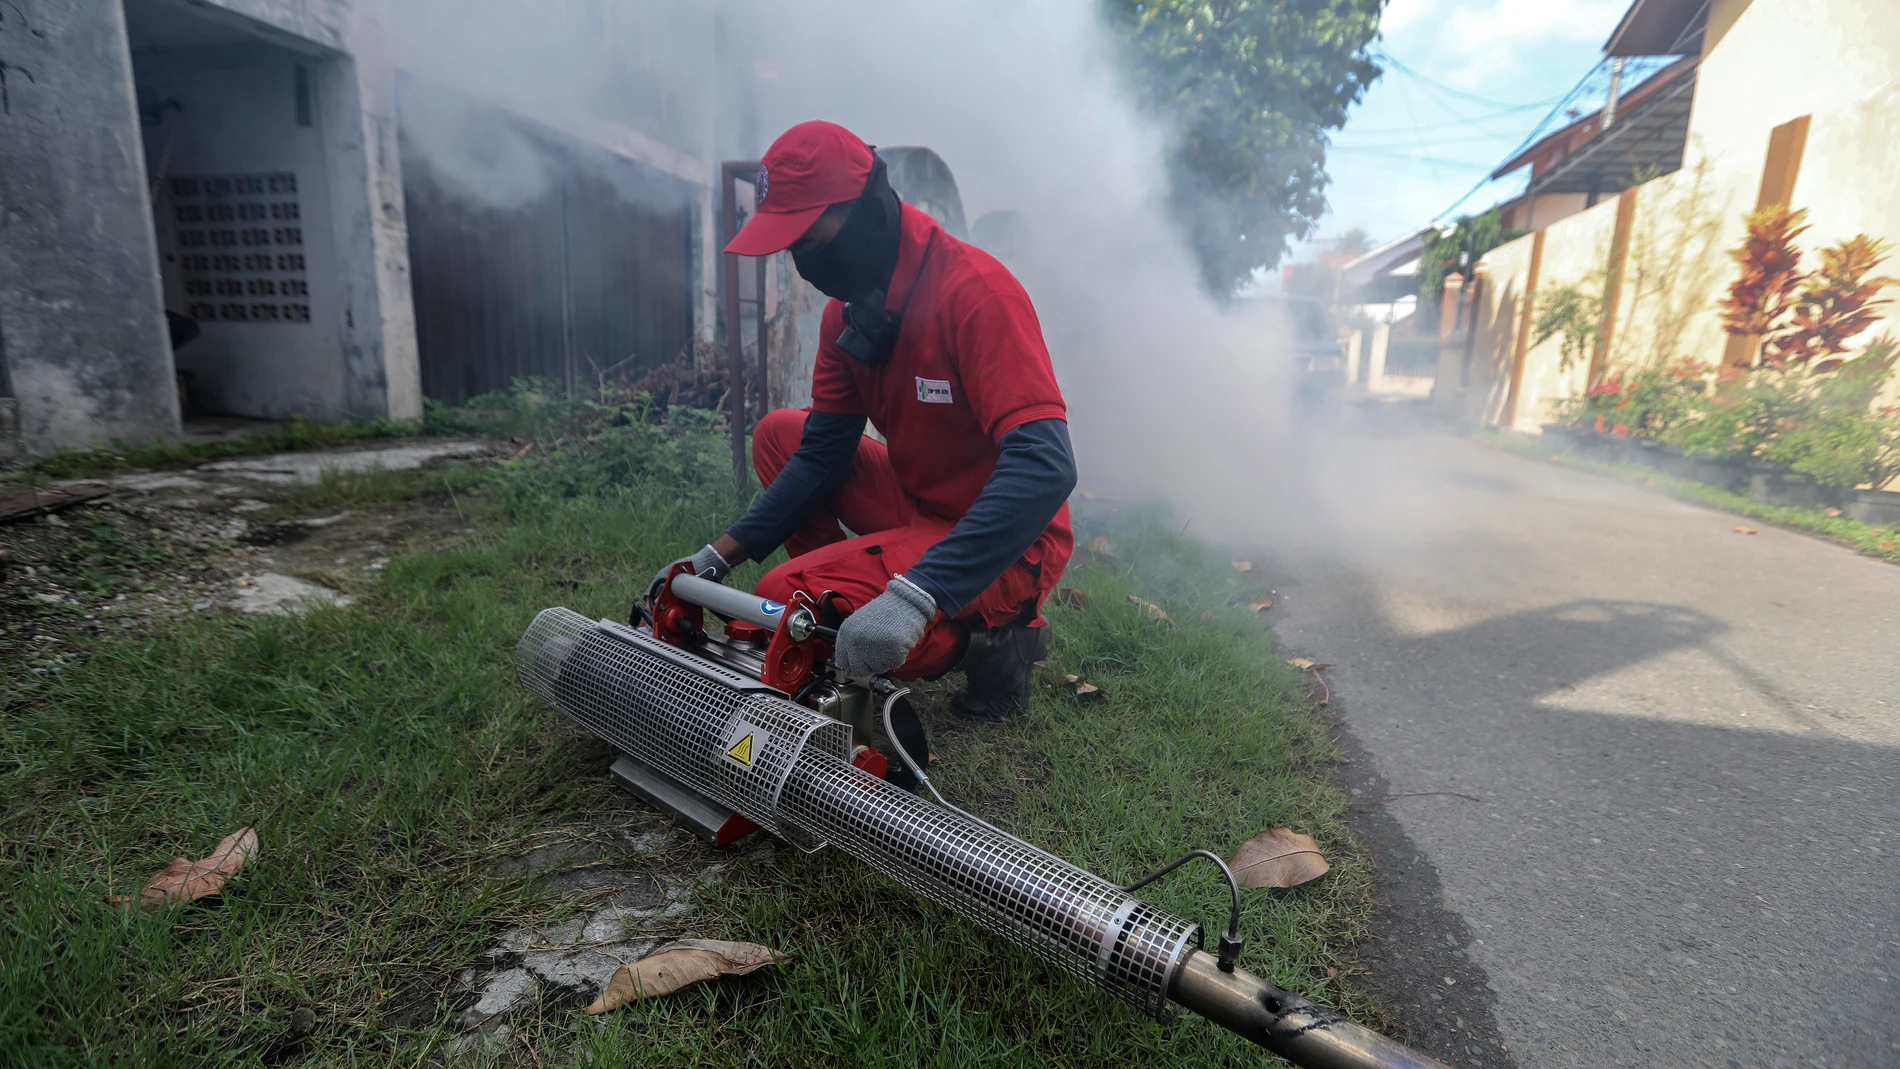 Banda Aceh (Indonesia), 30/10/2023.- A worker prepares to fumigate with anti-mosquito fog to control dengue fever at a residential area in Banda Aceh, Indonesia, 30 October 2023. The Banda Aceh city government carried out fogging actions related to reports of an increase in dengue fever carried by the Aedes aegypti mosquito in densely populated urban areas. (Egipto) EFE/EPA/HOTLI SIMANJUNTAK